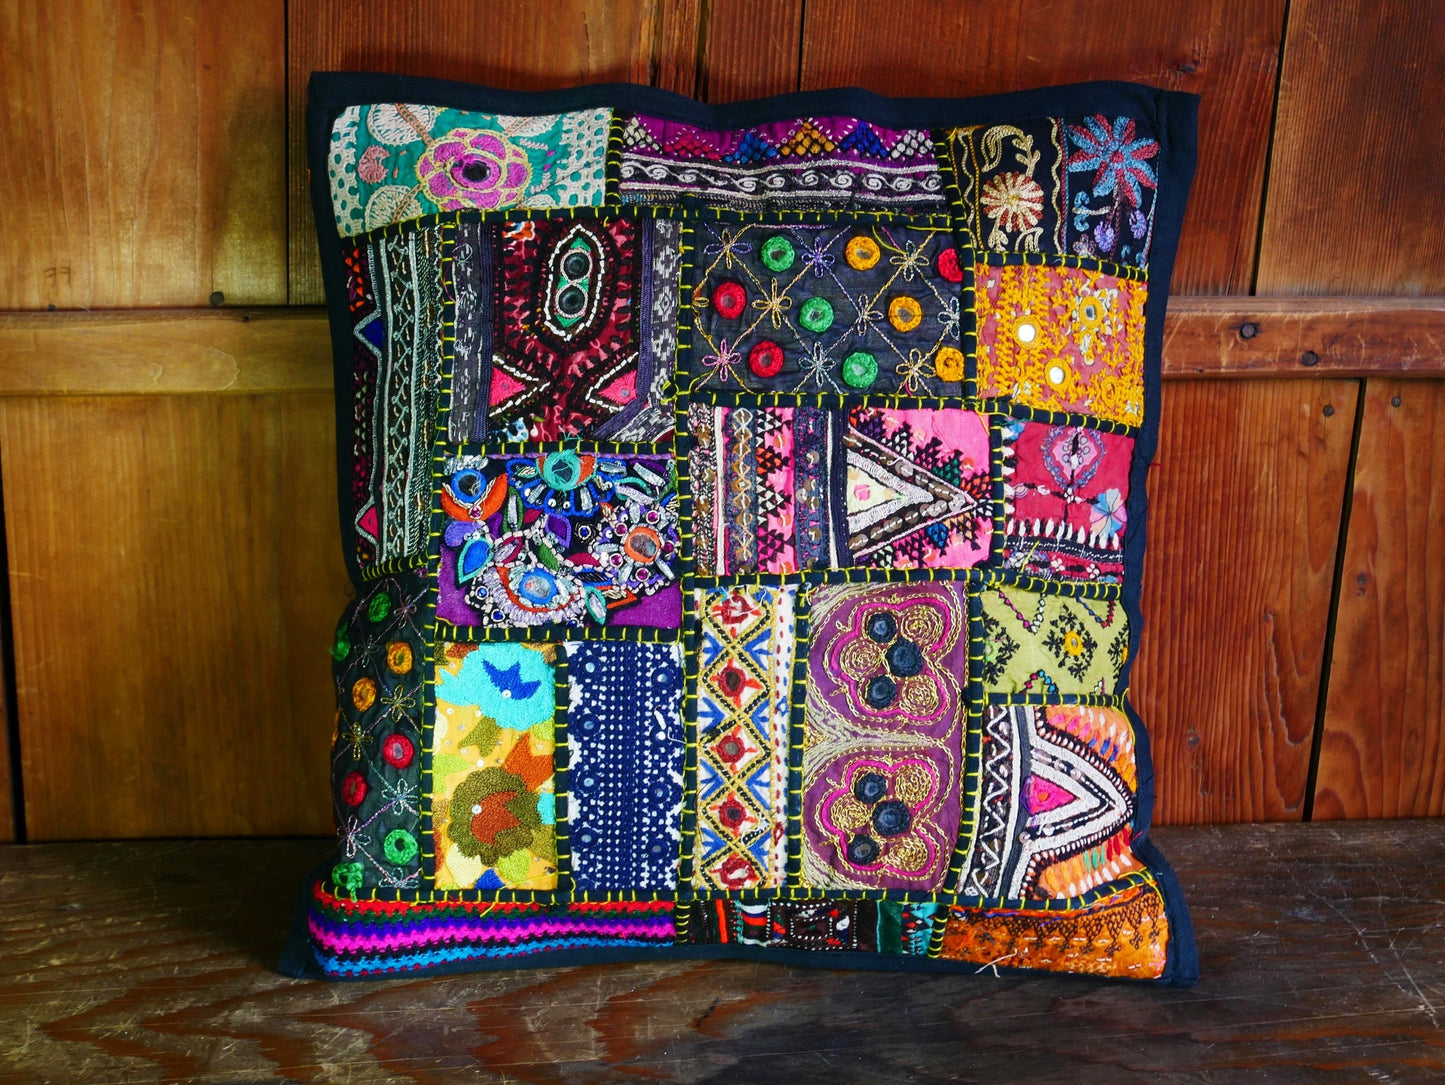 Boho throw pillow set - Indian Tribal cushion cover | colorful, decorative patchwork pillows | bohemian gypsy hippie decor -Cover only-